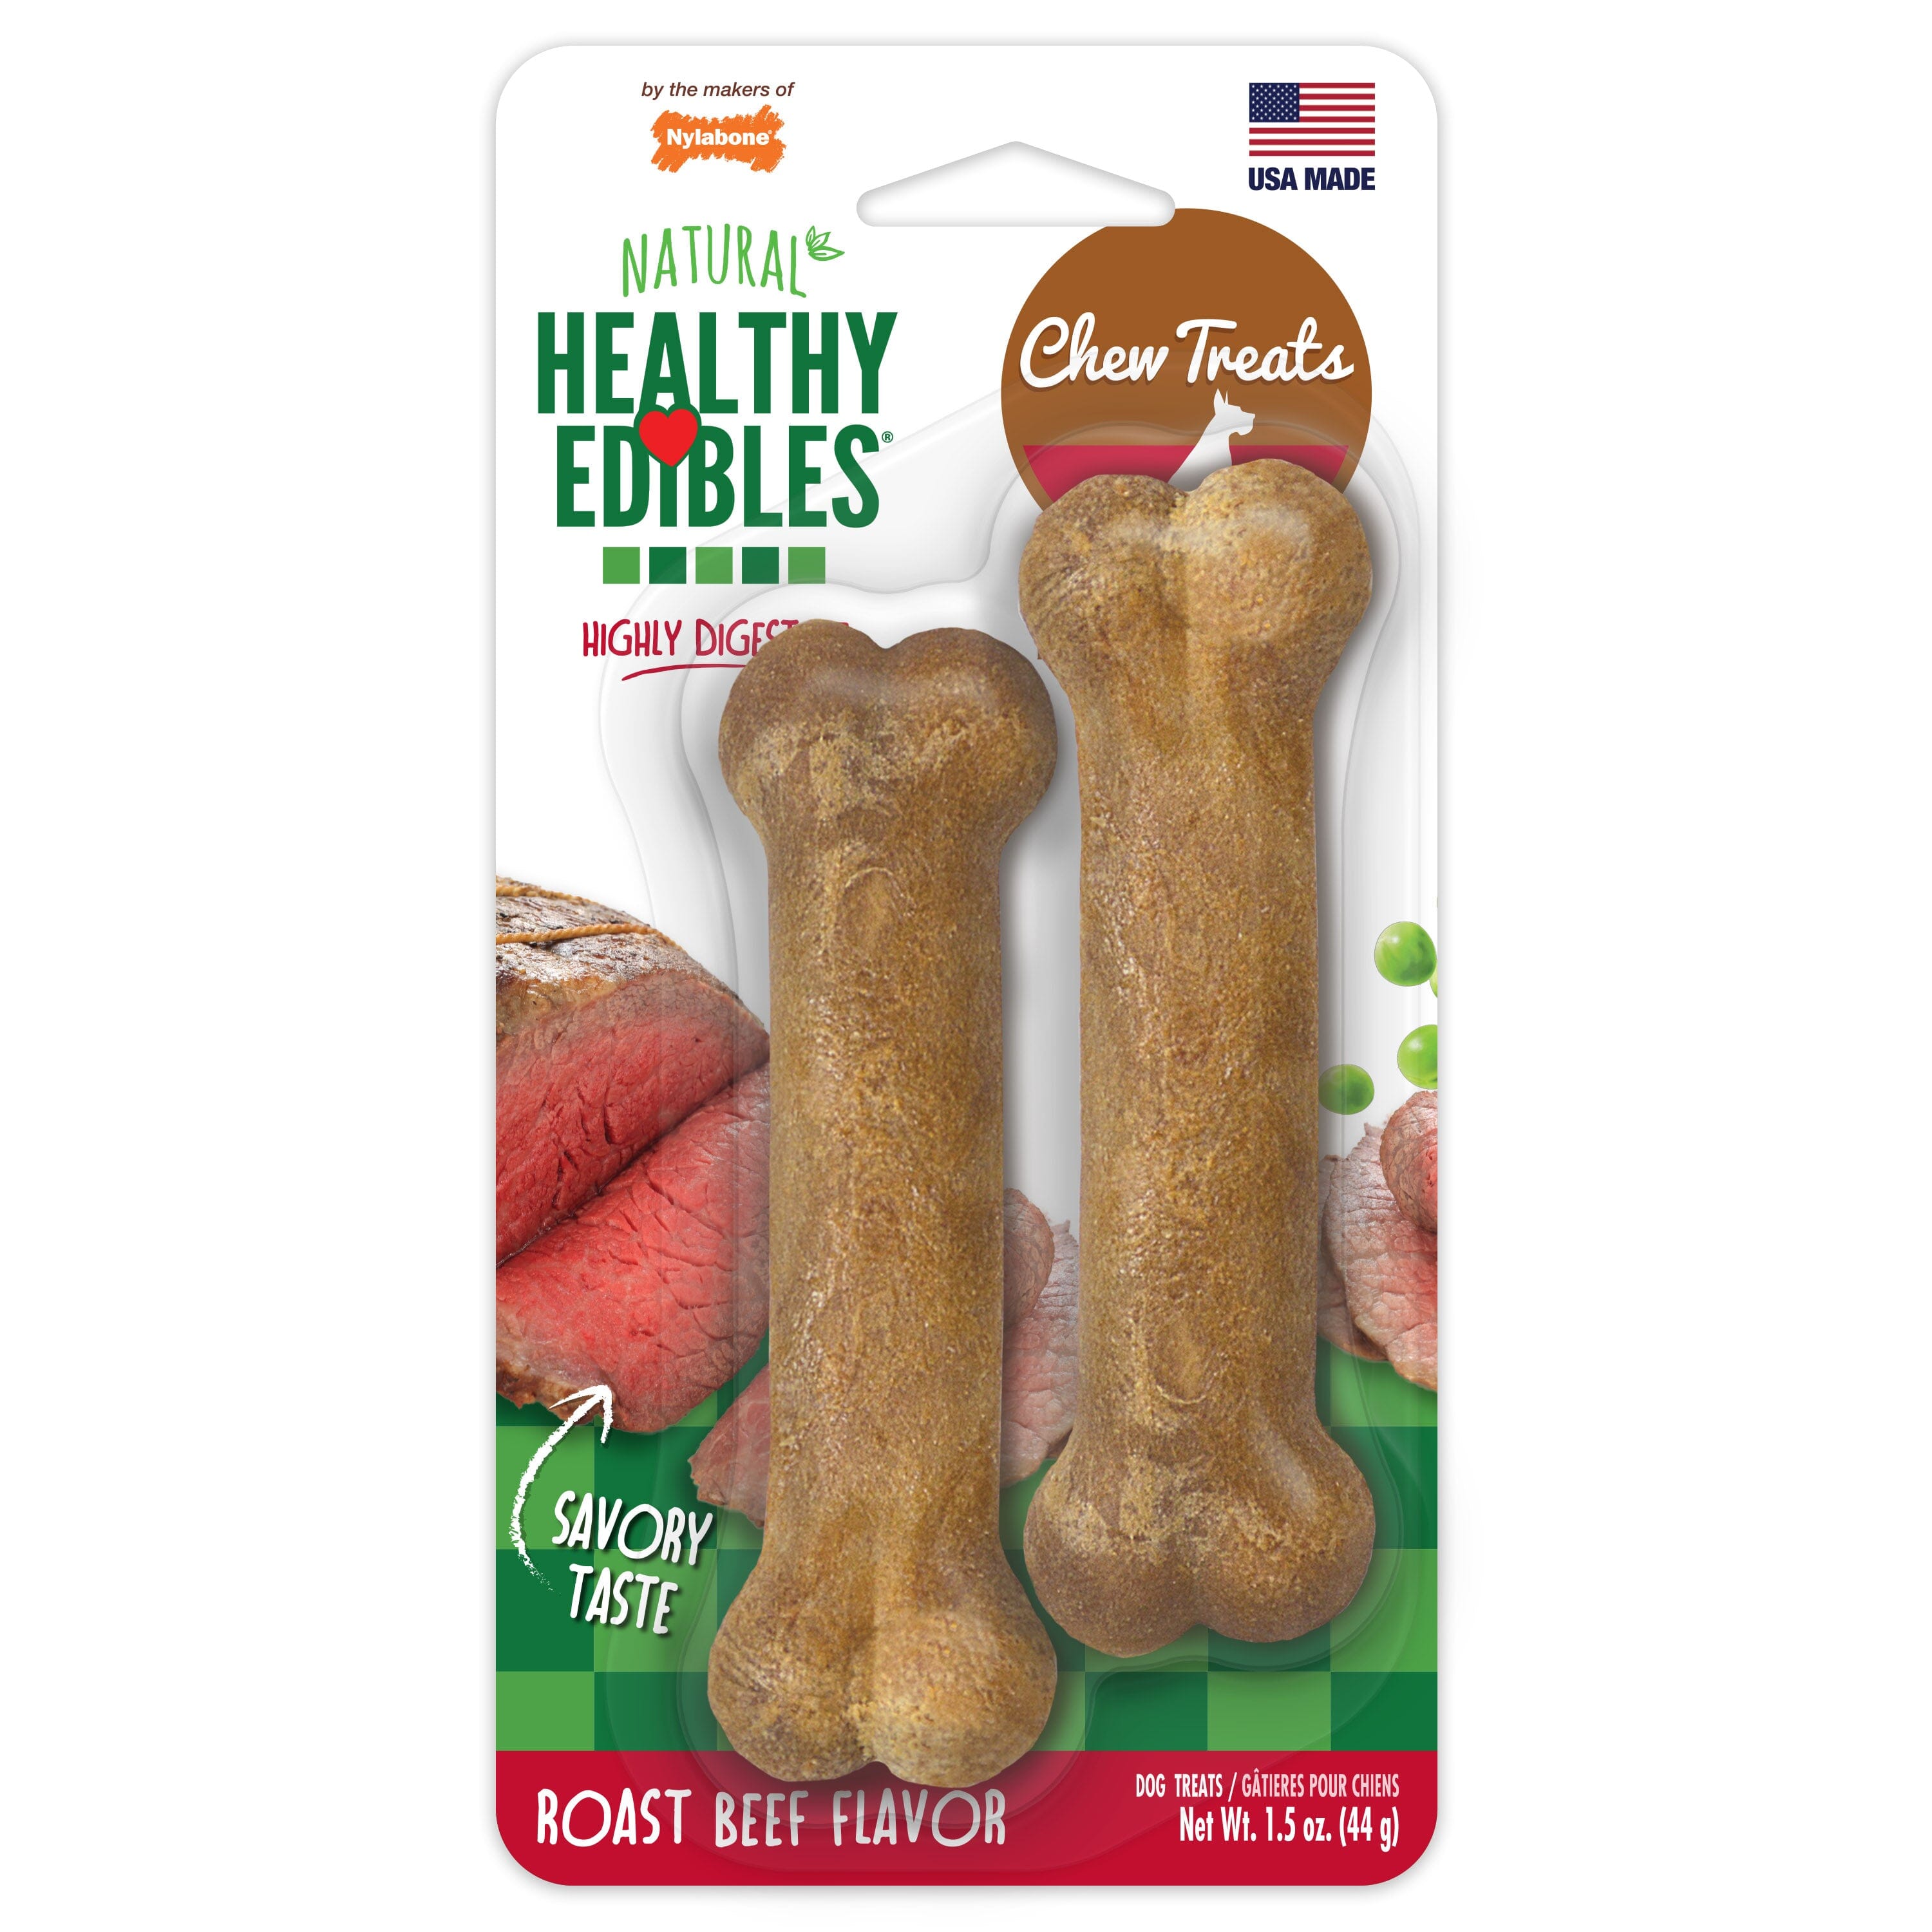 Nylabone Healthy Edibles Roast Beef Flavor Chew Treats for Dog Roast Beef - Extra Small/Petite - 2 Count  